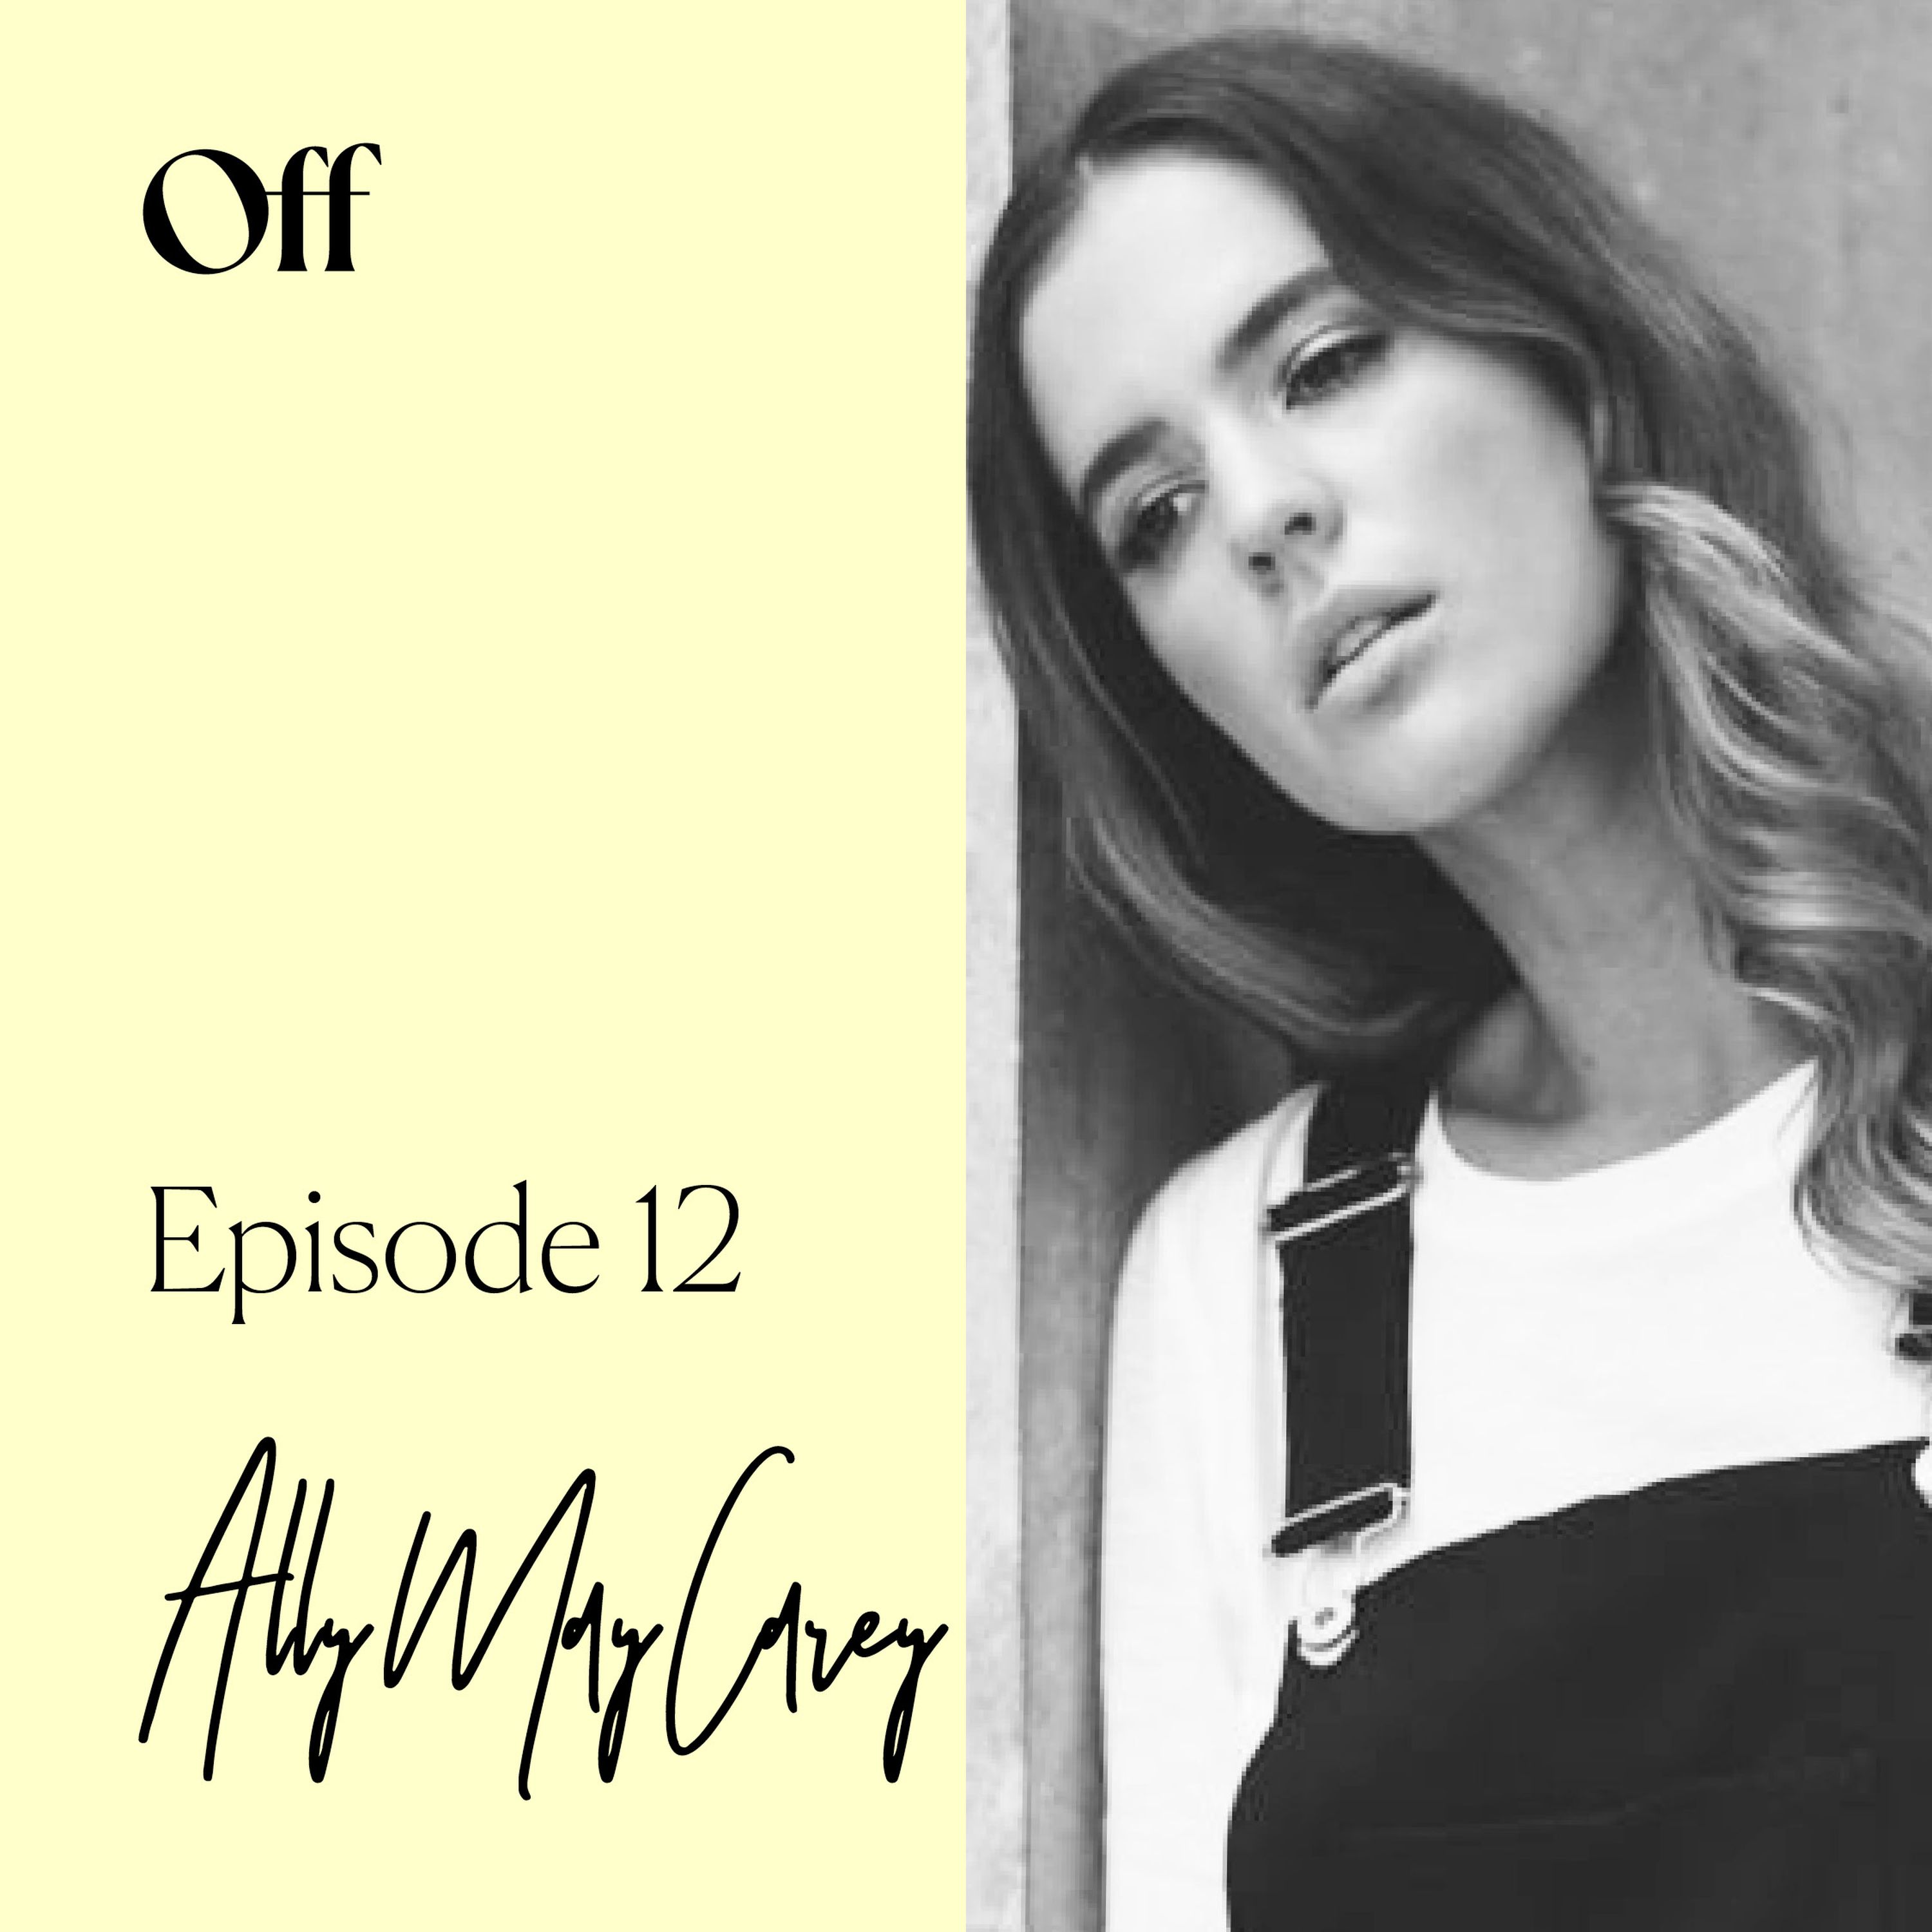 Ally May Carey on creating content that is thoughtful & seeks to spark change.